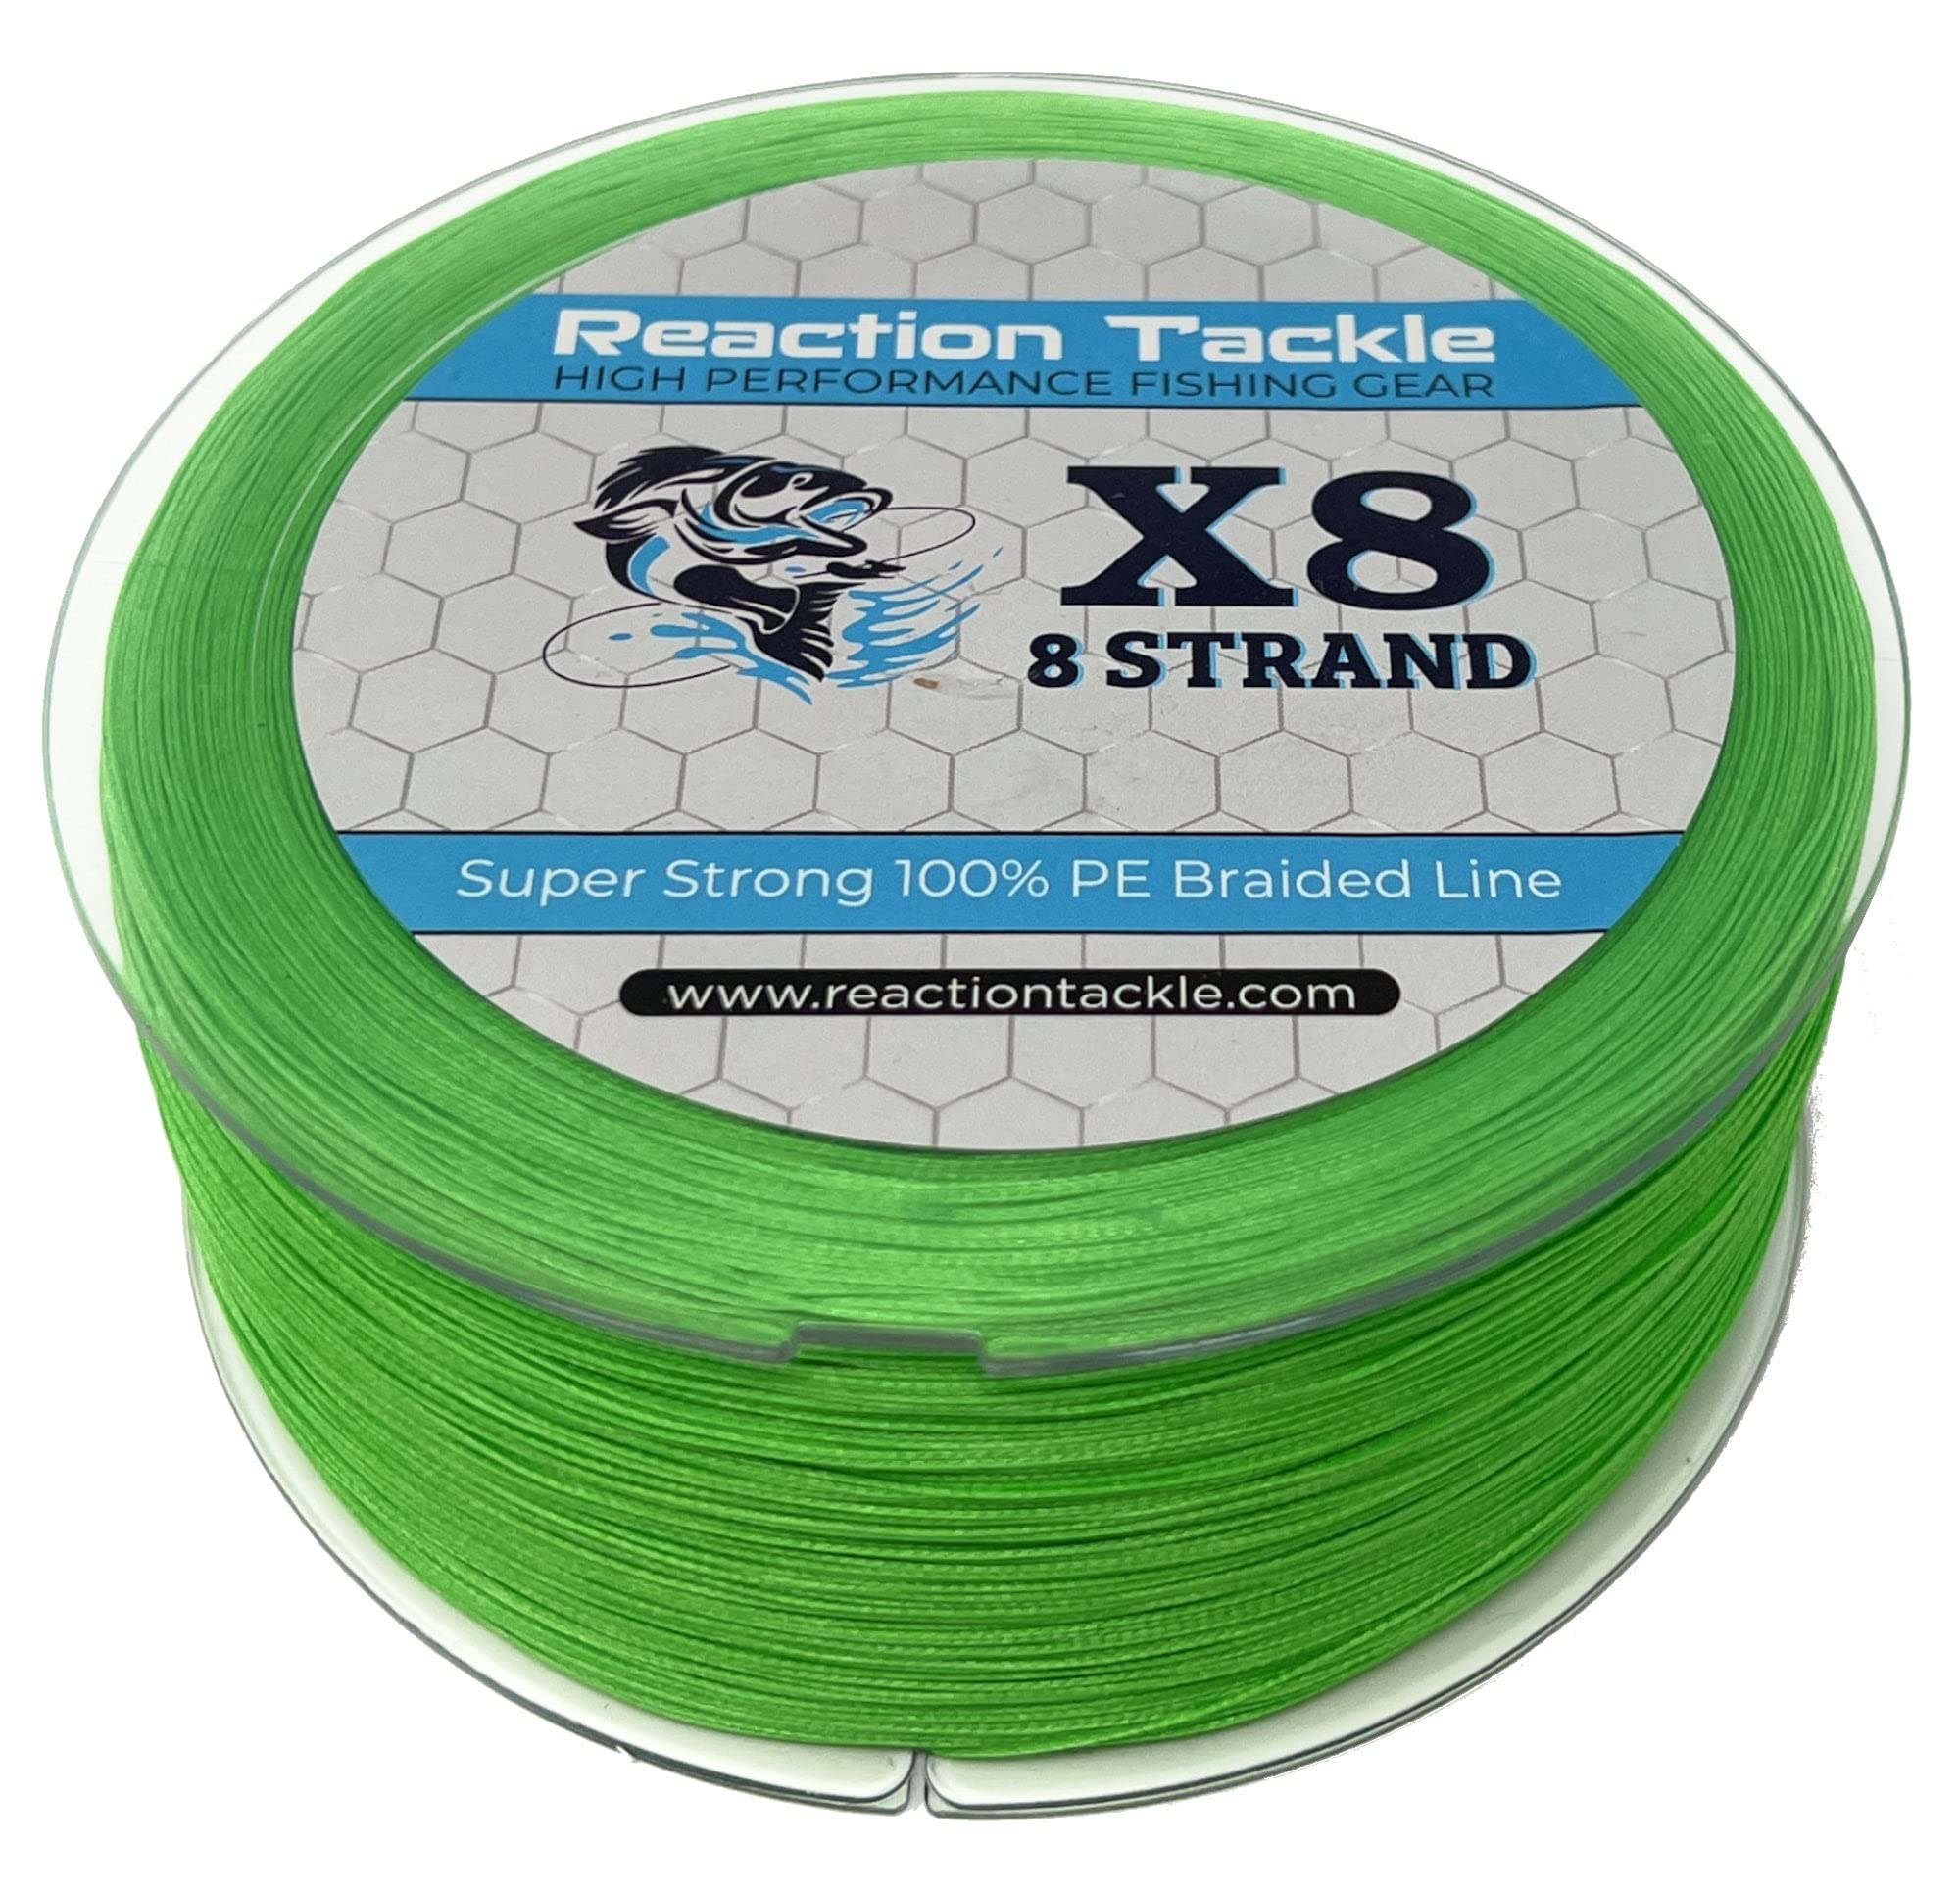  Reaction Tackle Monofilament Fishing Line- Strong